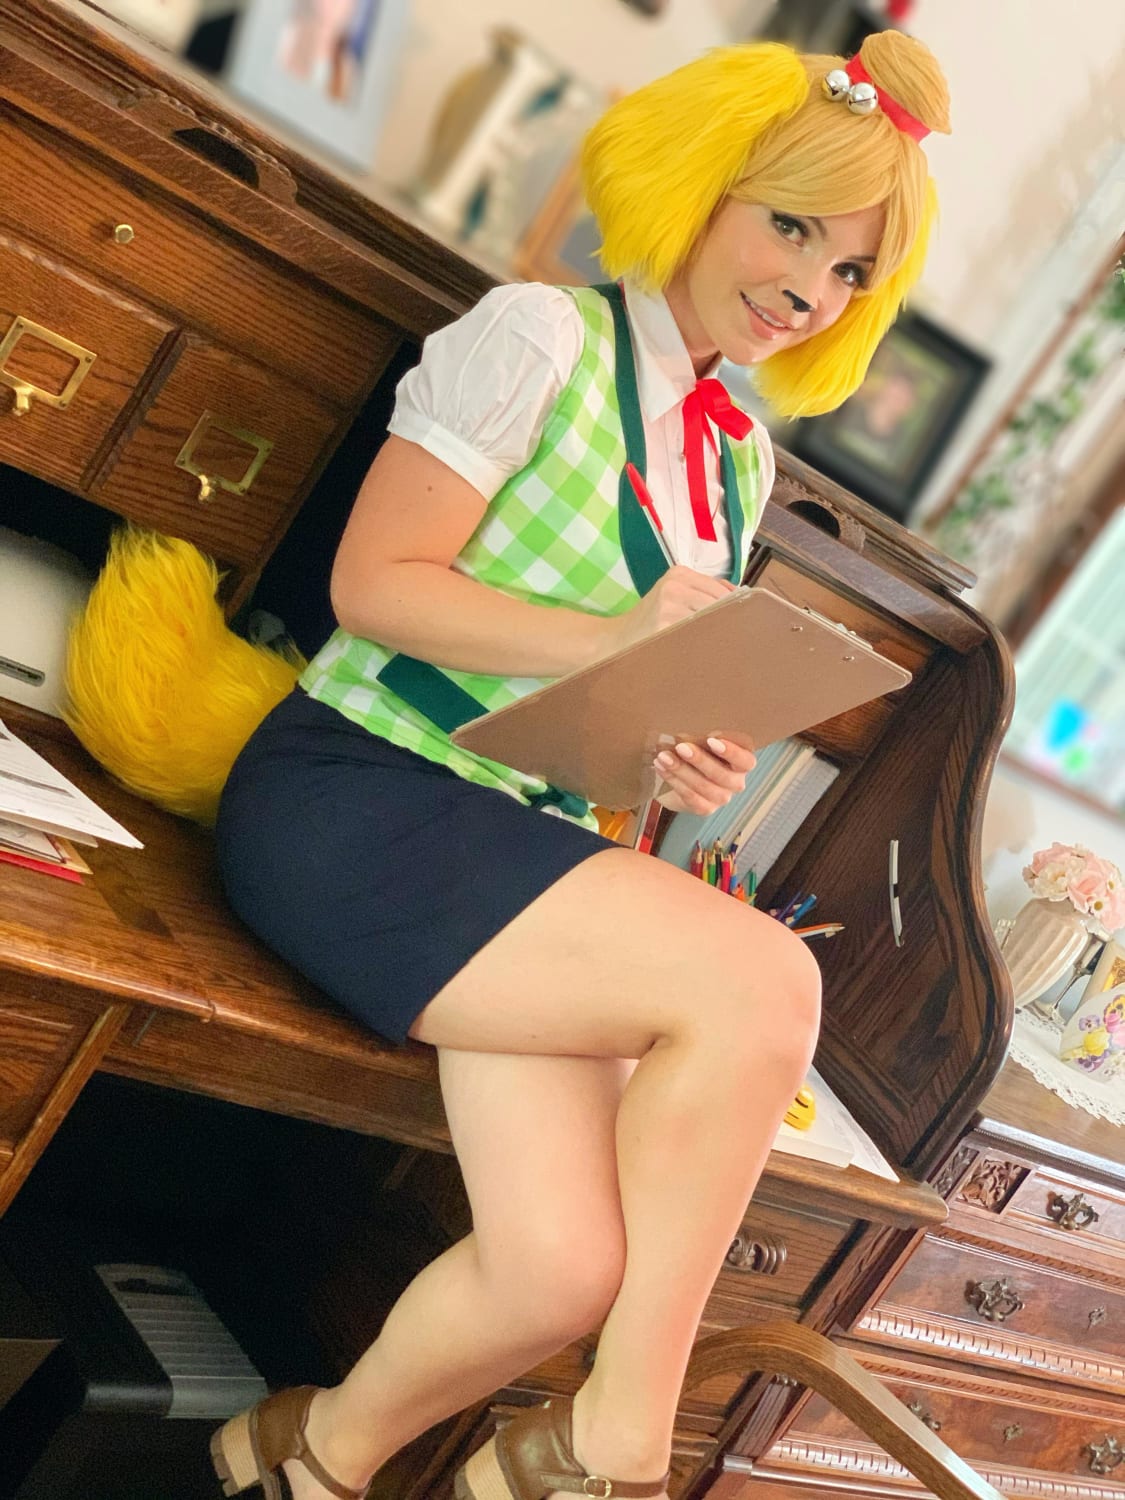 Sharing my Isabelle cosplay since the updates keep dragging me back to ACNH